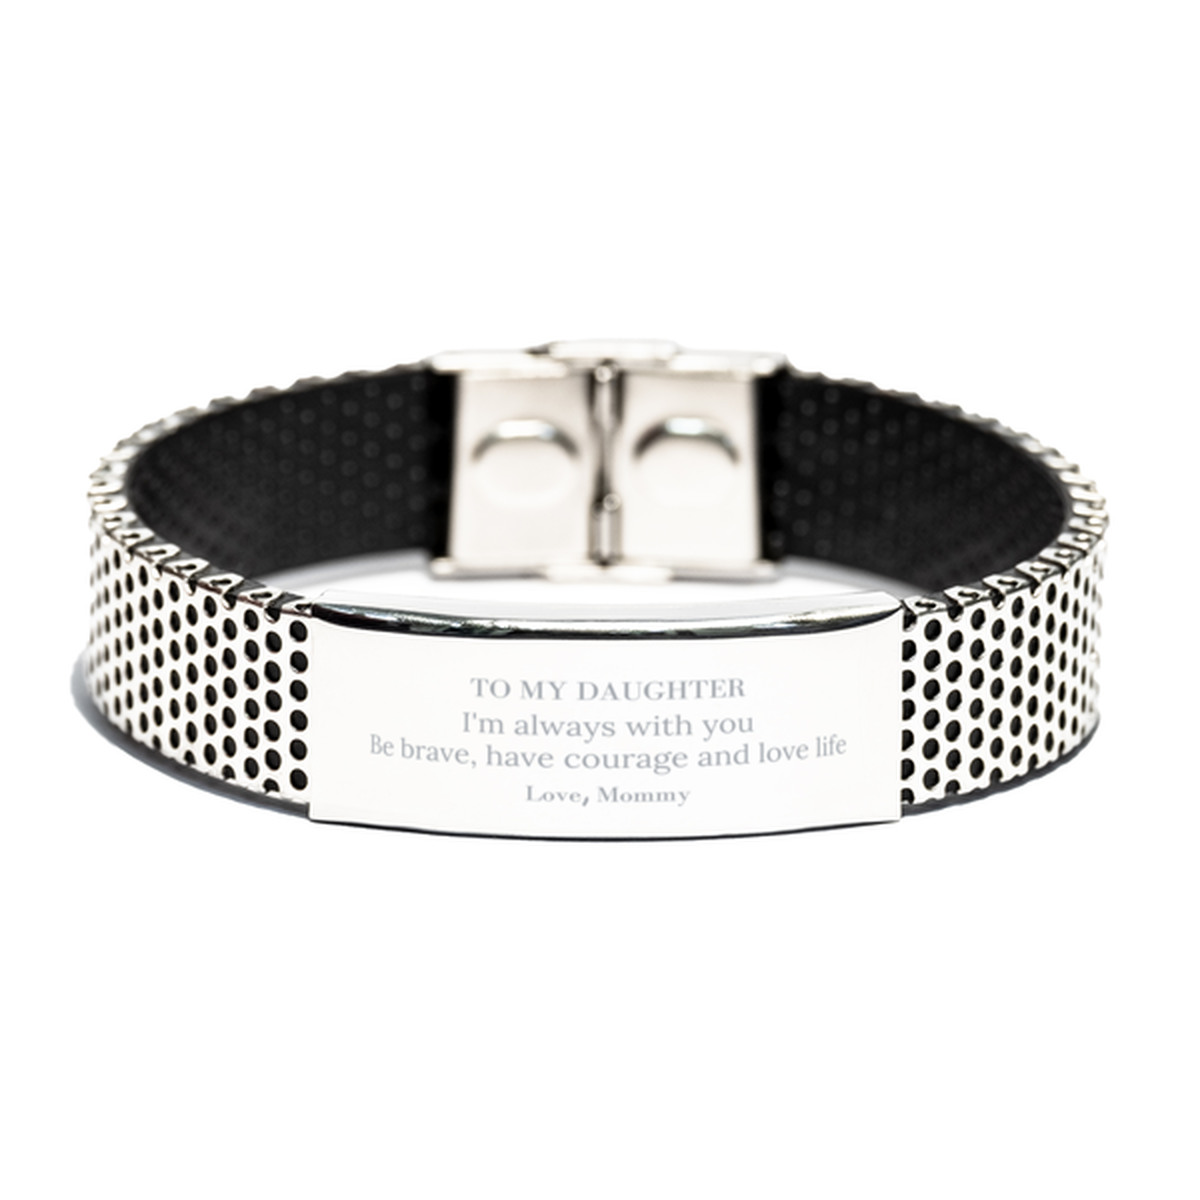 To My Daughter Gifts from Mommy, Unique Stainless Steel Bracelet Inspirational Christmas Birthday Graduation Gifts for Daughter I'm always with you. Be brave, have courage and love life. Love, Mommy